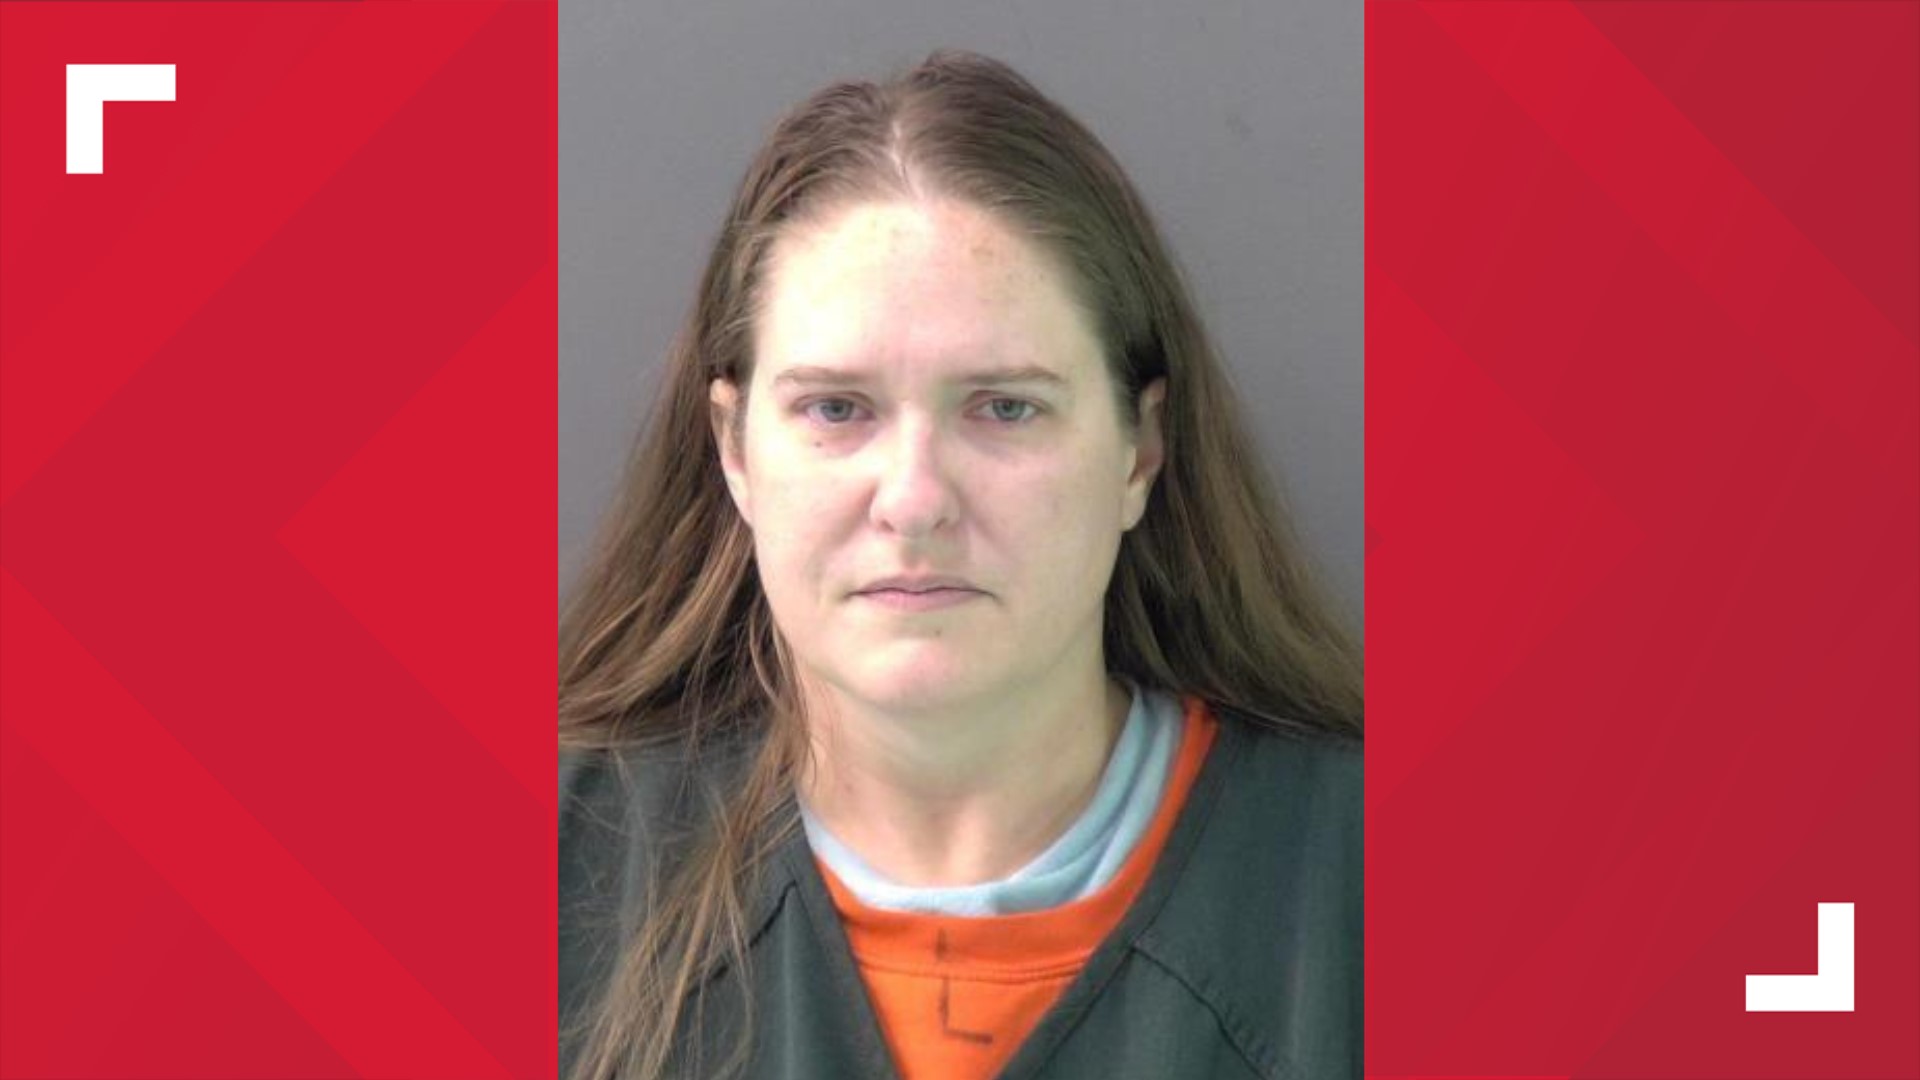 A woman was arrested for murder days after what was initially considered a failed double suicide that resulted in her husband's death.